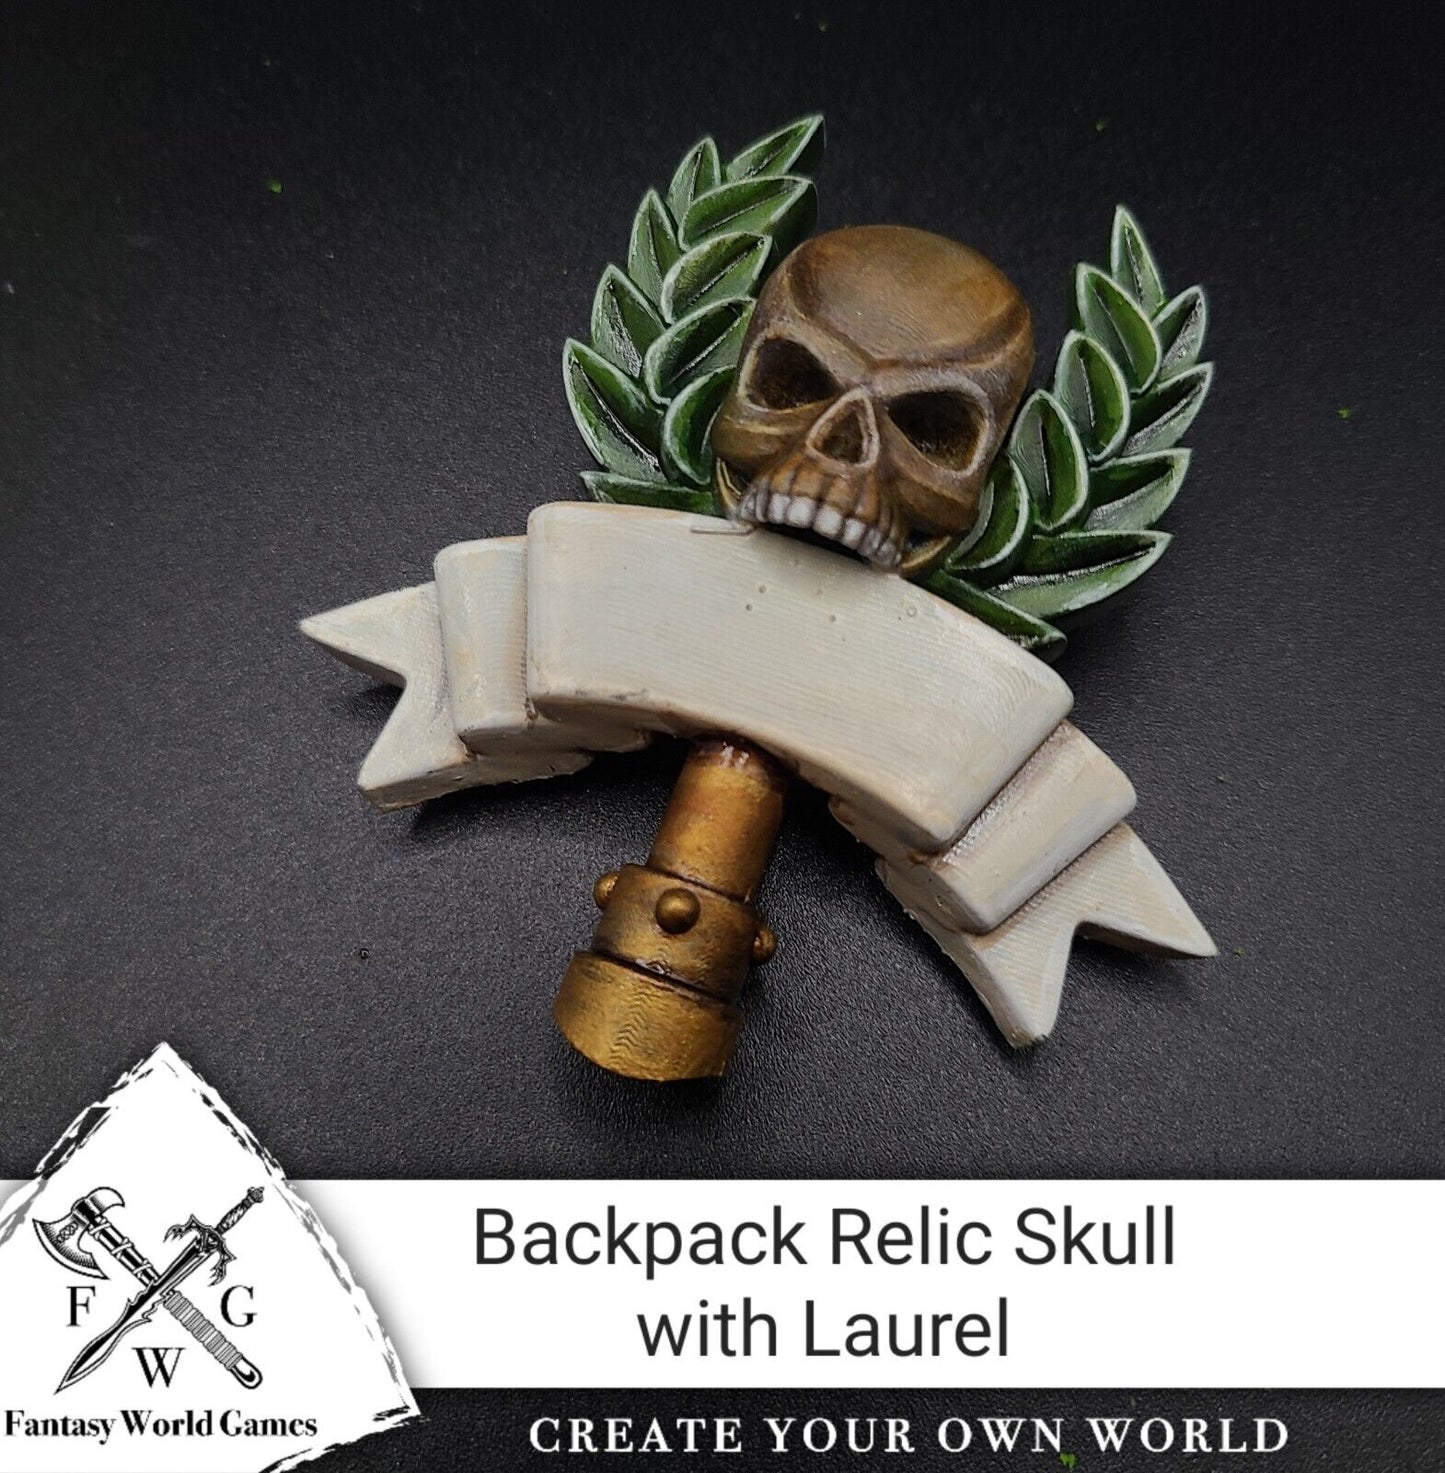 Fantasy World Games McFarlane Toys Backpack AccessoryRelic Skull with Laurel for Space Marines